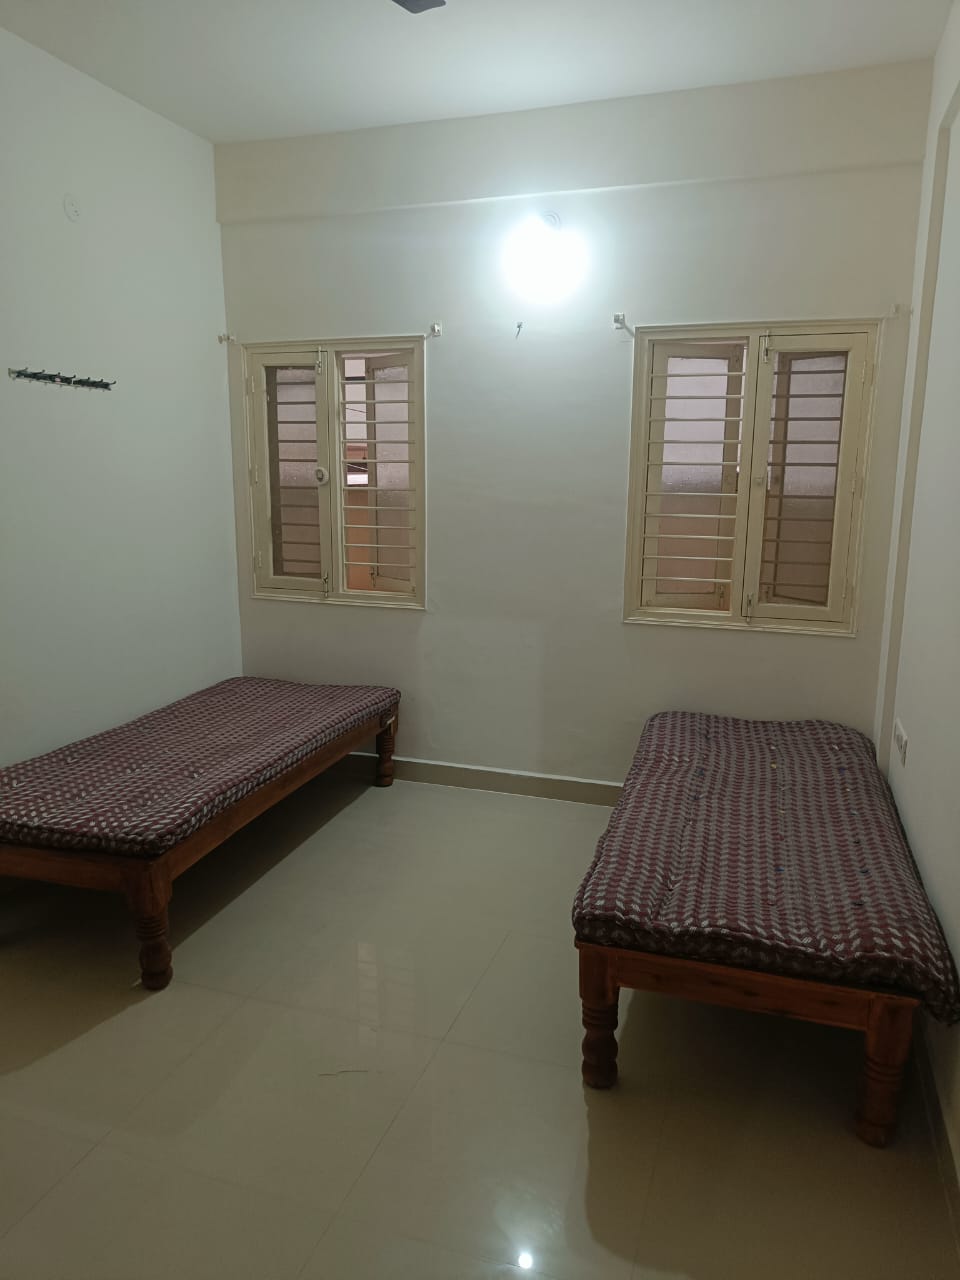 1 BHK Independent House for Lease Only at JAML2 - 1654 in Kaggadasapura